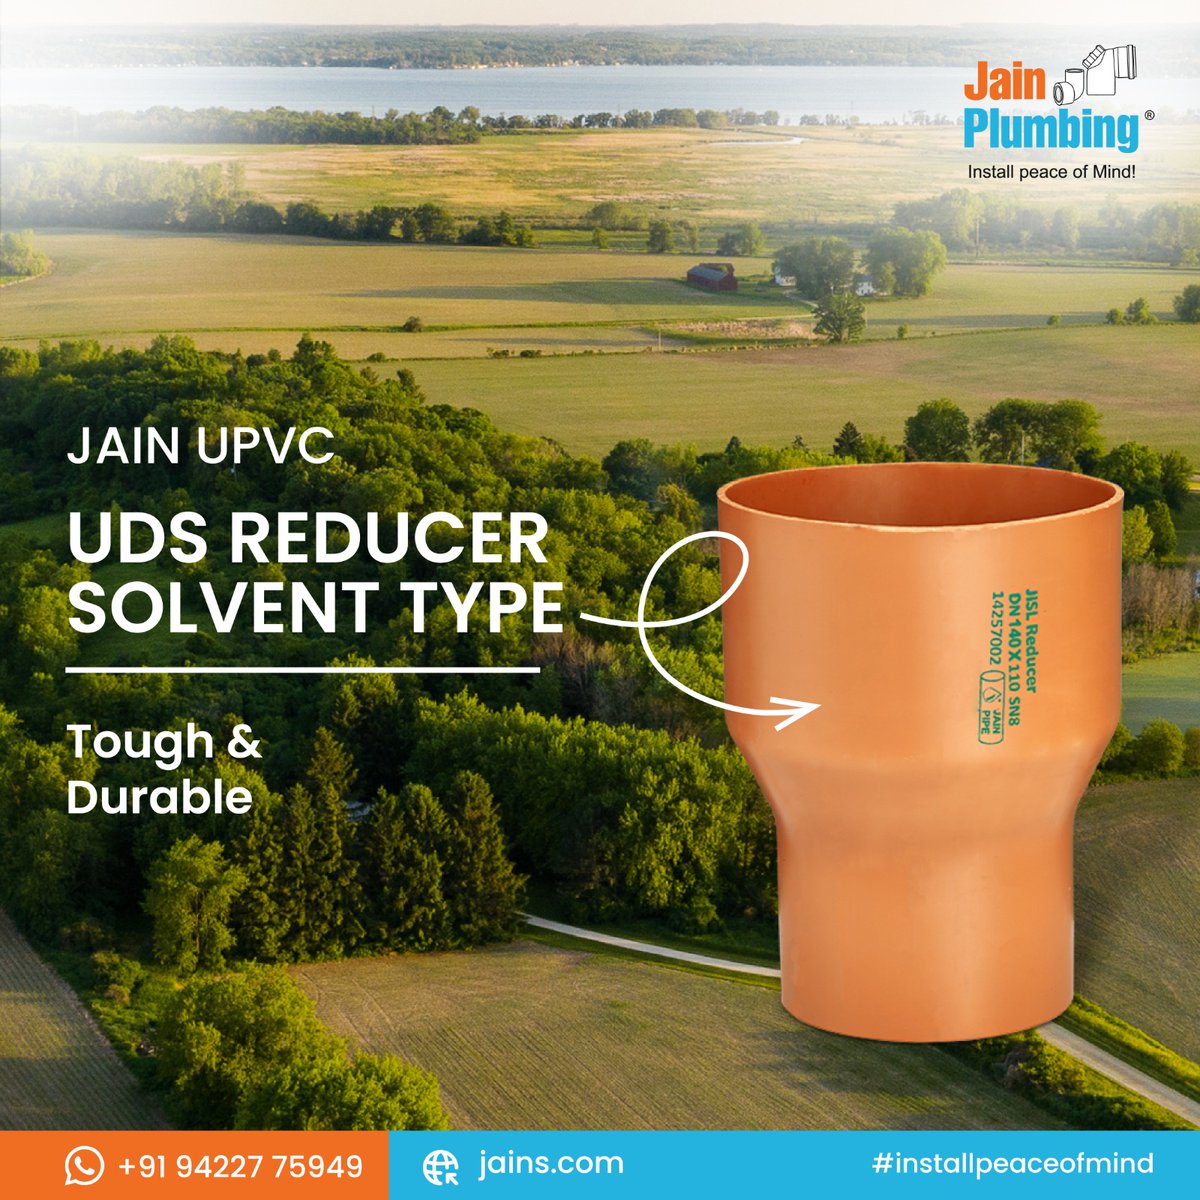 🛠 Enhance your underground drainage system with the robust reliability of Jain's UPVC UDS reducer solvent fitting. With Jain Plumbing, embrace peace of mind in every installation. 💯🏗 #jainplumbing #UDS #fittings #PipingSystems #installpeaceofmind